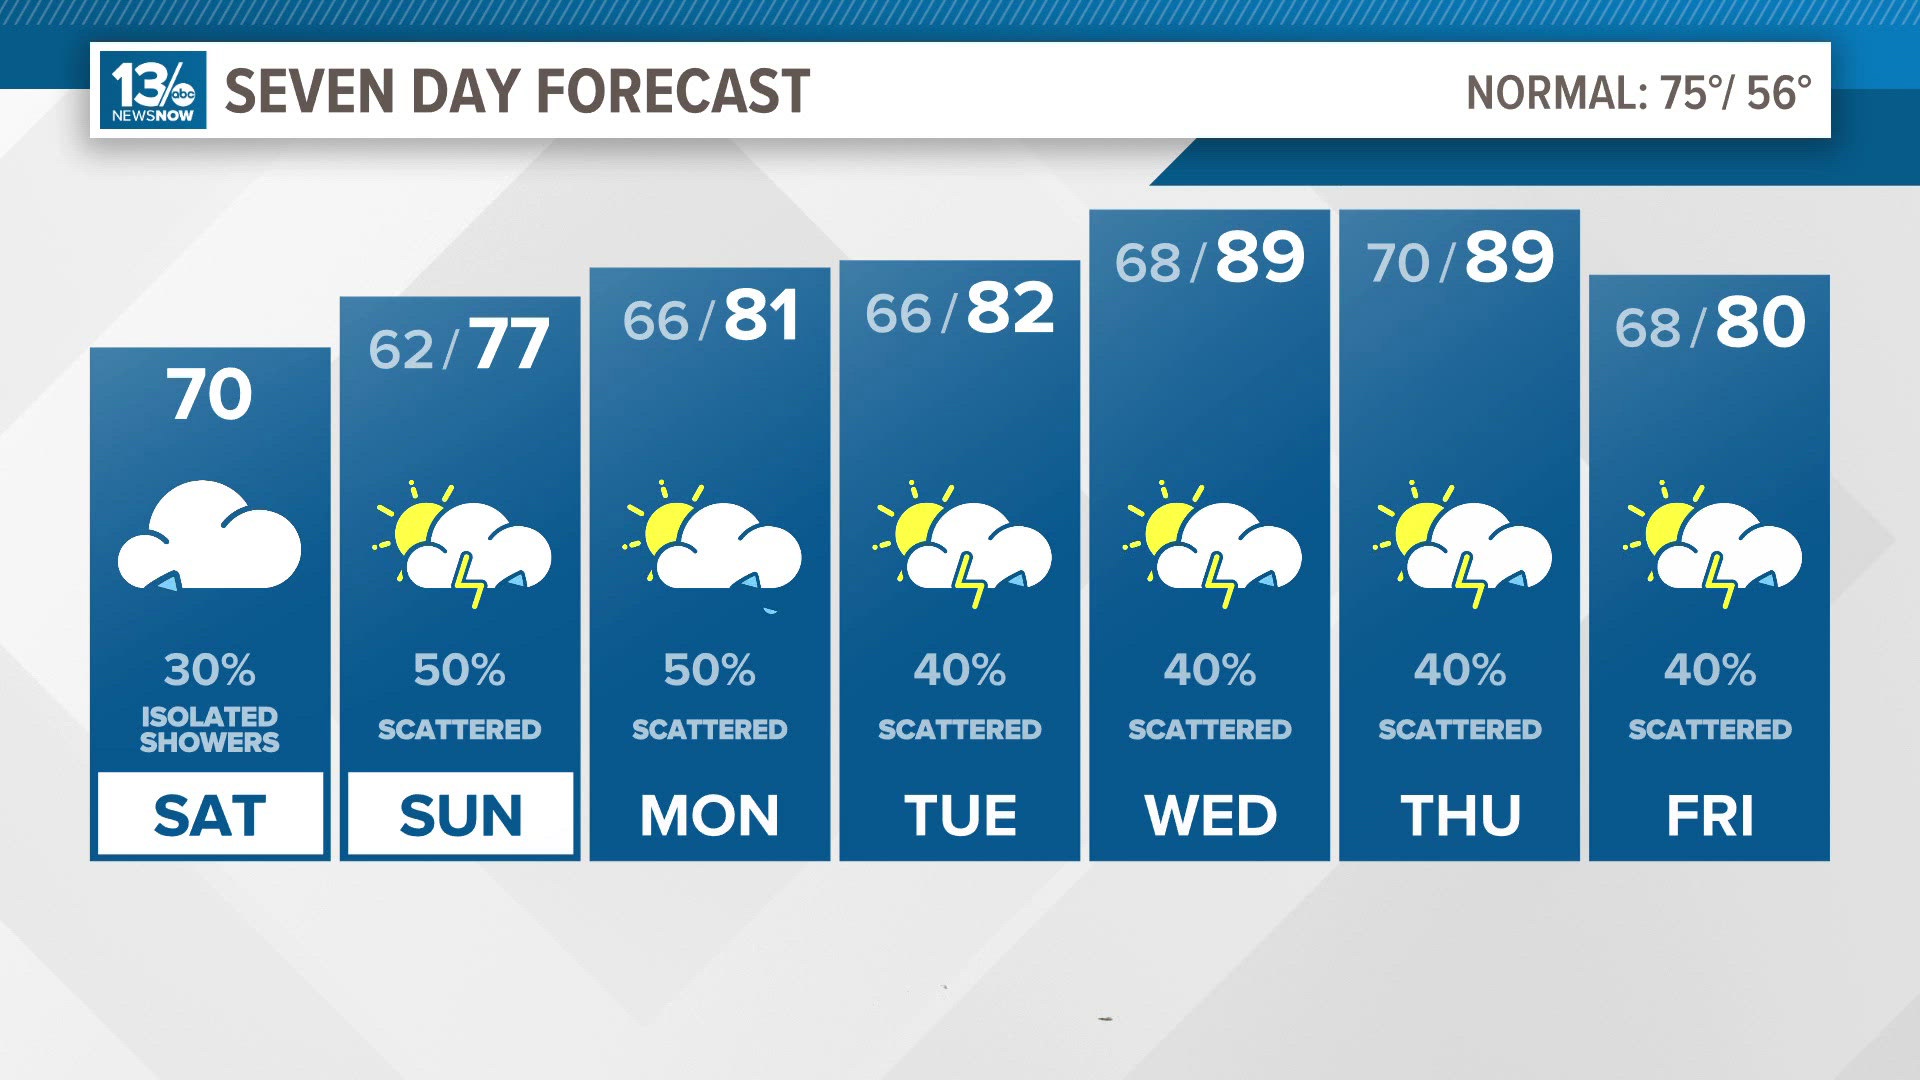 The unsettled pattern continues through the work week.